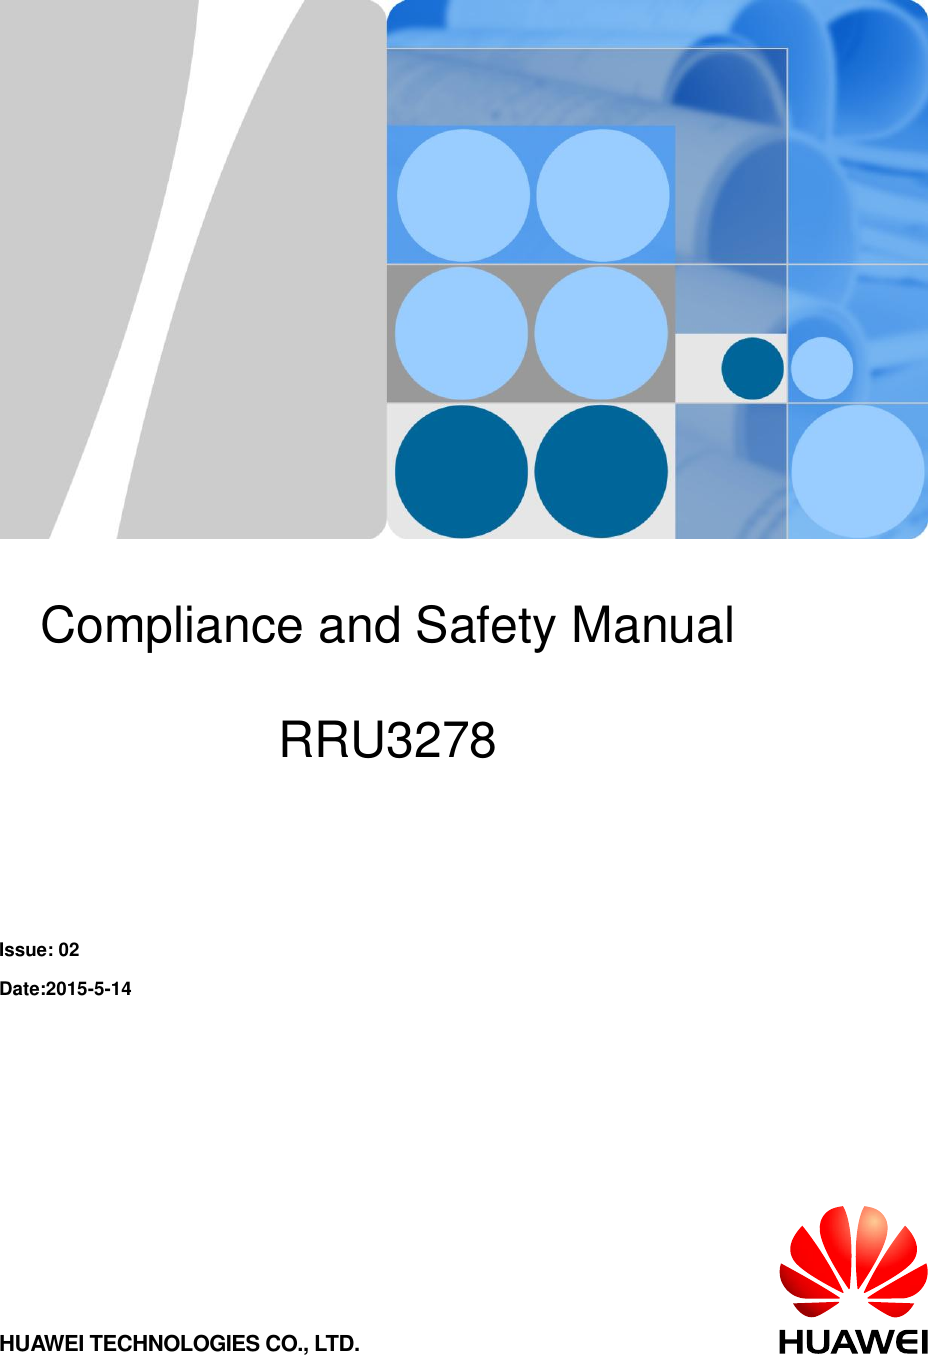            Compliance and Safety Manual  RRU3278     Issue: 02  Date:2015-5-14  HUAWEI TECHNOLOGIES CO., LTD. 